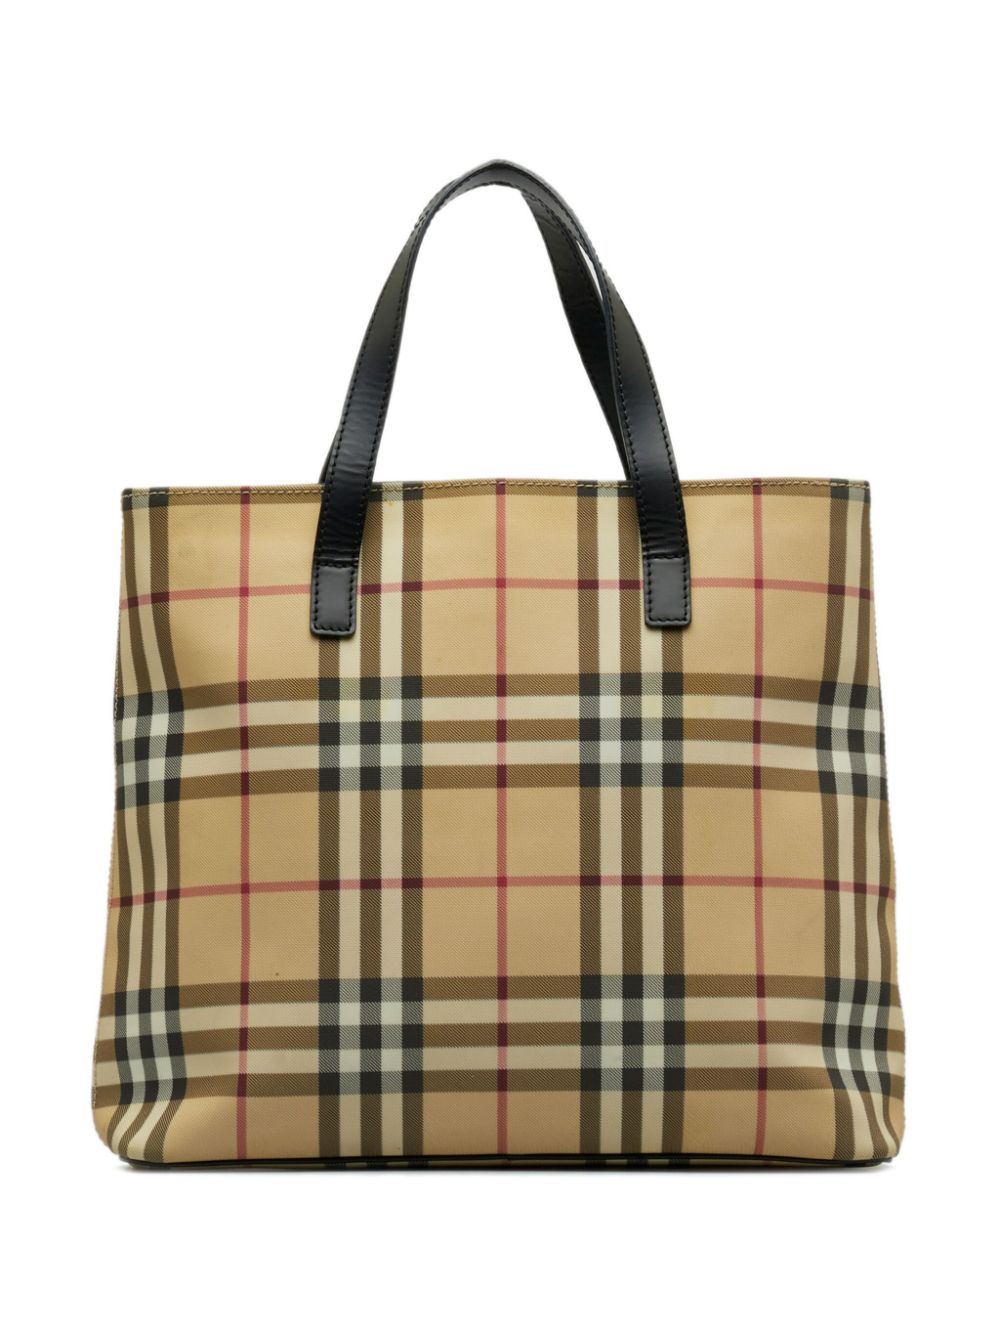 Burberry Pre-Owned House Check tote bag - Beige